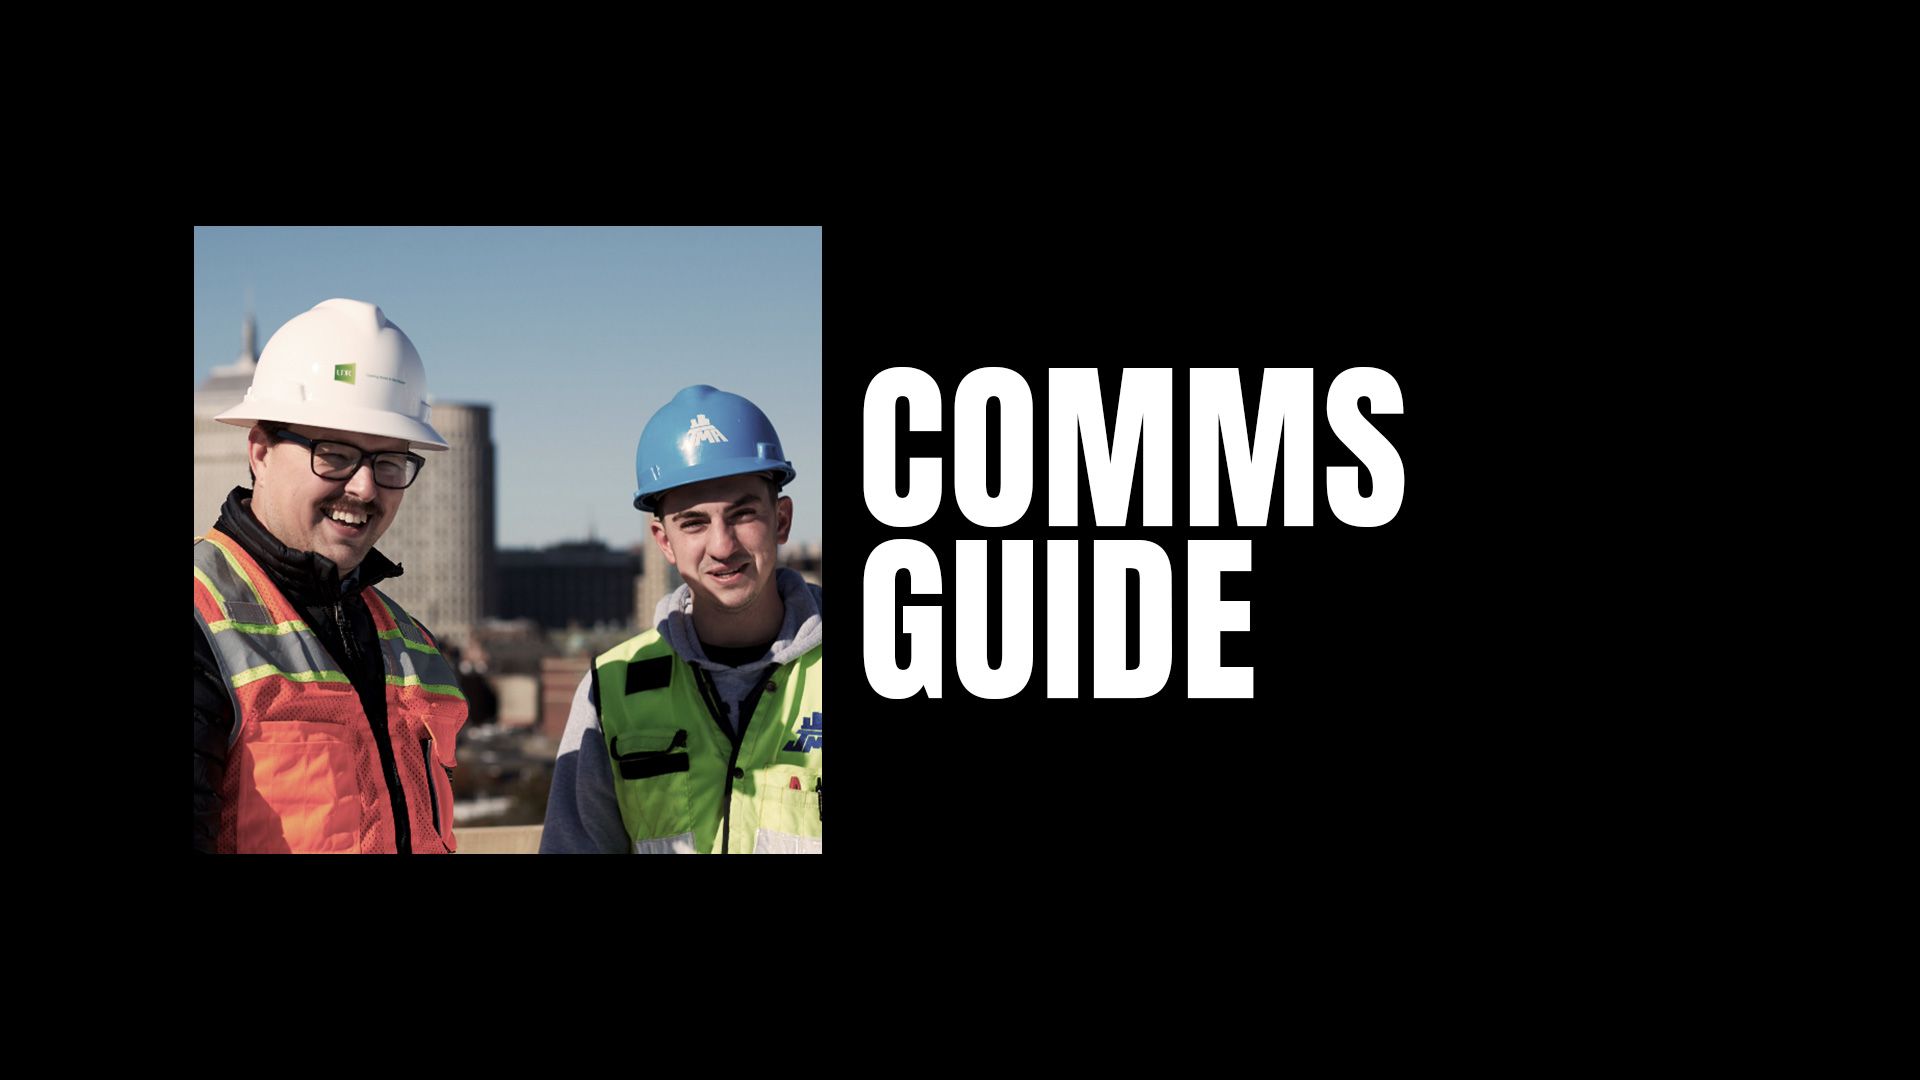 A thumbnail image of the communications guide